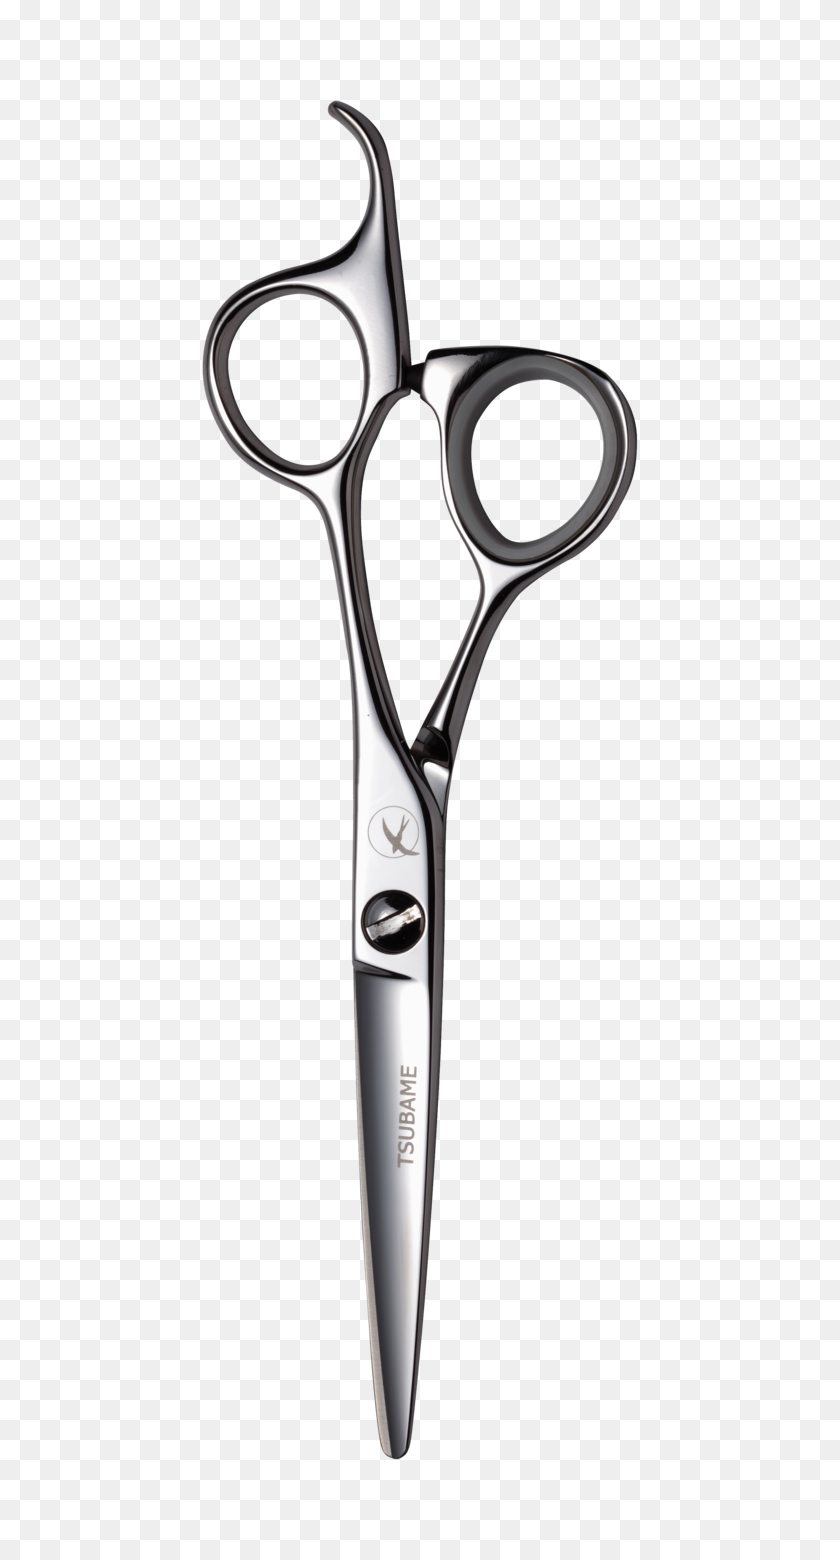 598x1500 The Best Affordable Hair Cutting Scissors Shears Tsubame - Shears PNG